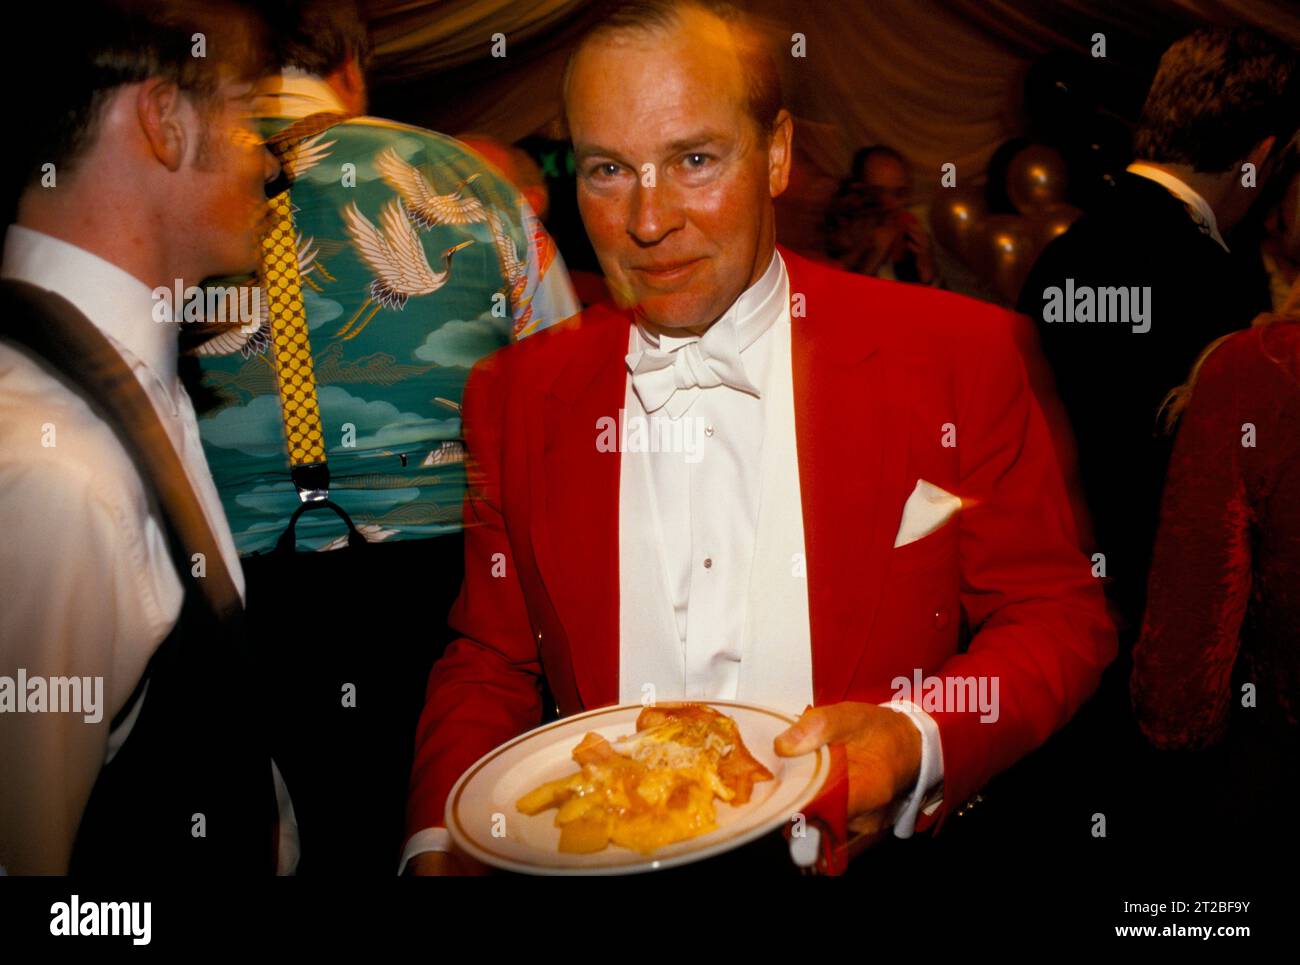 Hunt breakfast, Master of the Foxhounds, MFH wearing traditional Hunting Pink he has been queuing up and is now served his breakfast. Everyone has been up all night.  Tysoe, Warwickshire, England April 1982. 1980s UK HOMER SYKES. Stock Photo